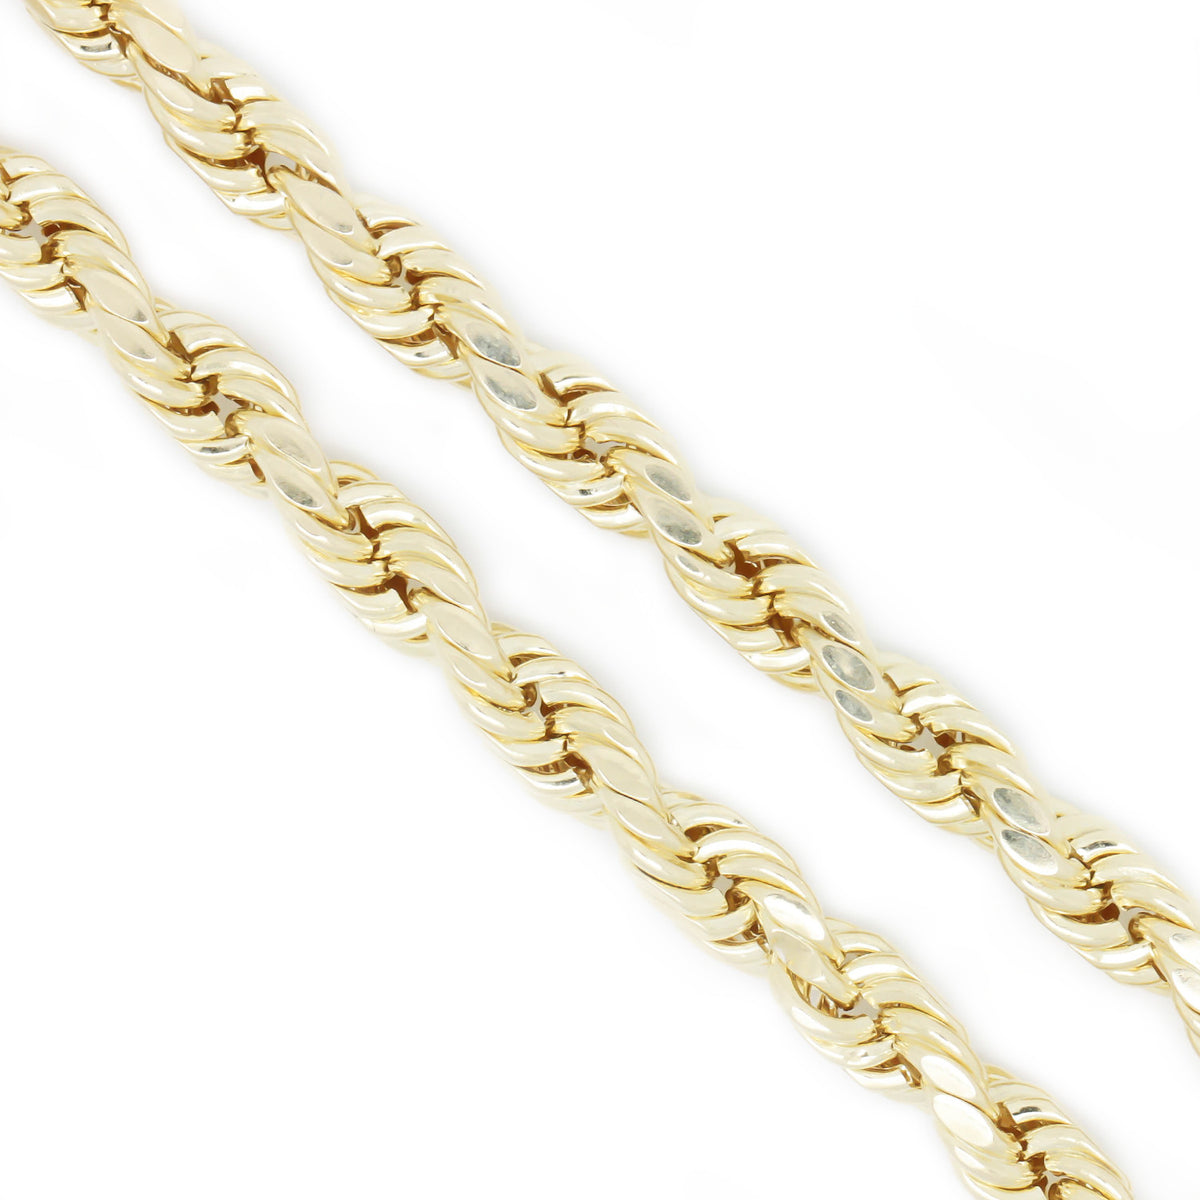 10K Yellow Gold 4.75 mm Rope Chain Necklace 24 Inches